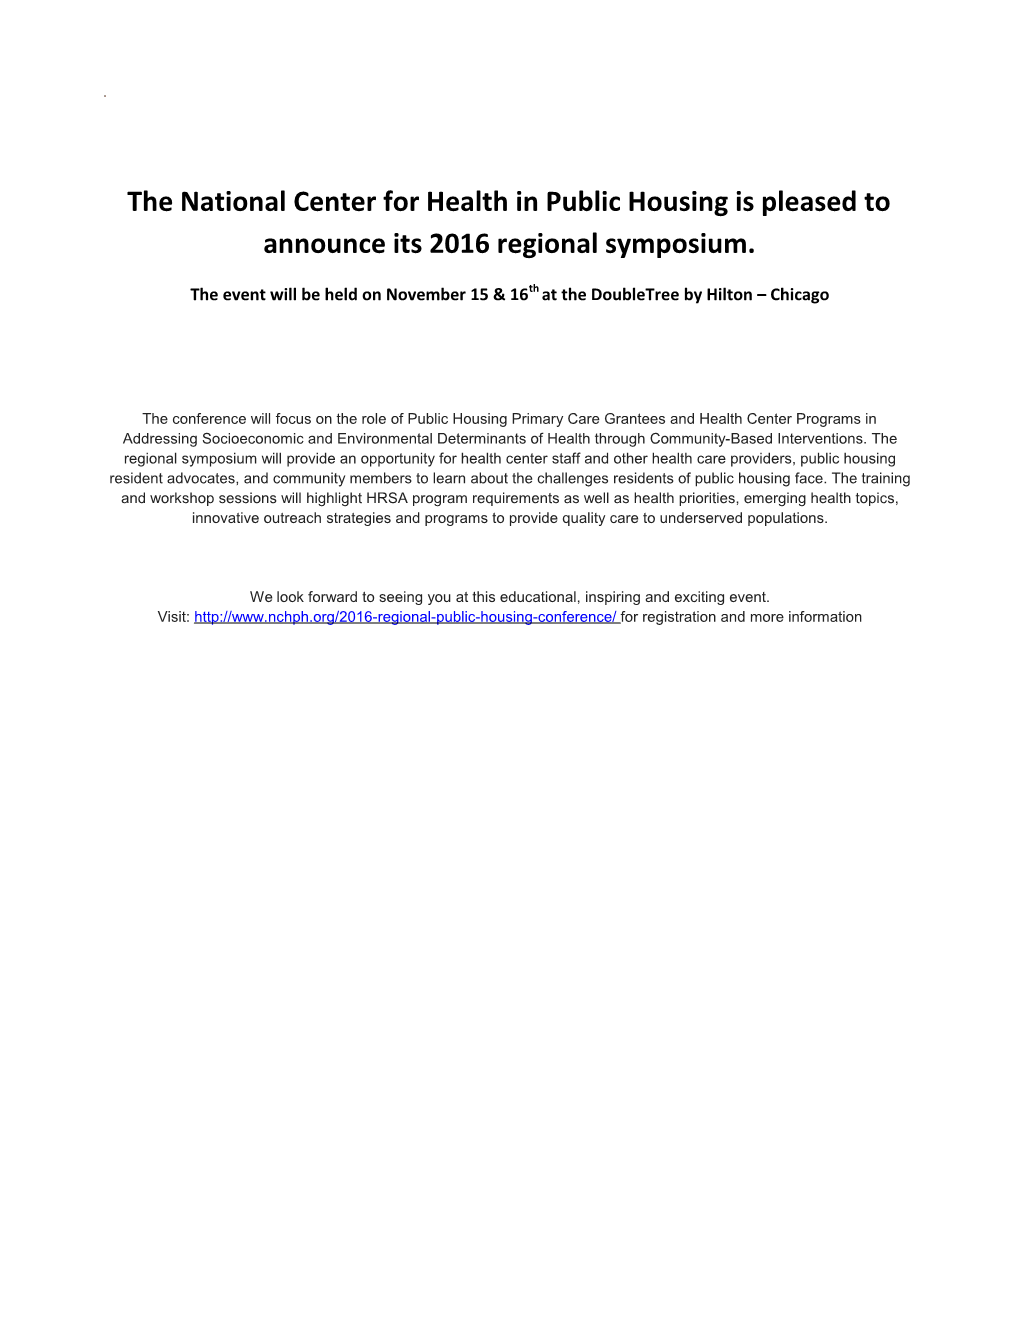 The National Center for Health in Public Housing Is Pleased to Announce Its 2016 Regional